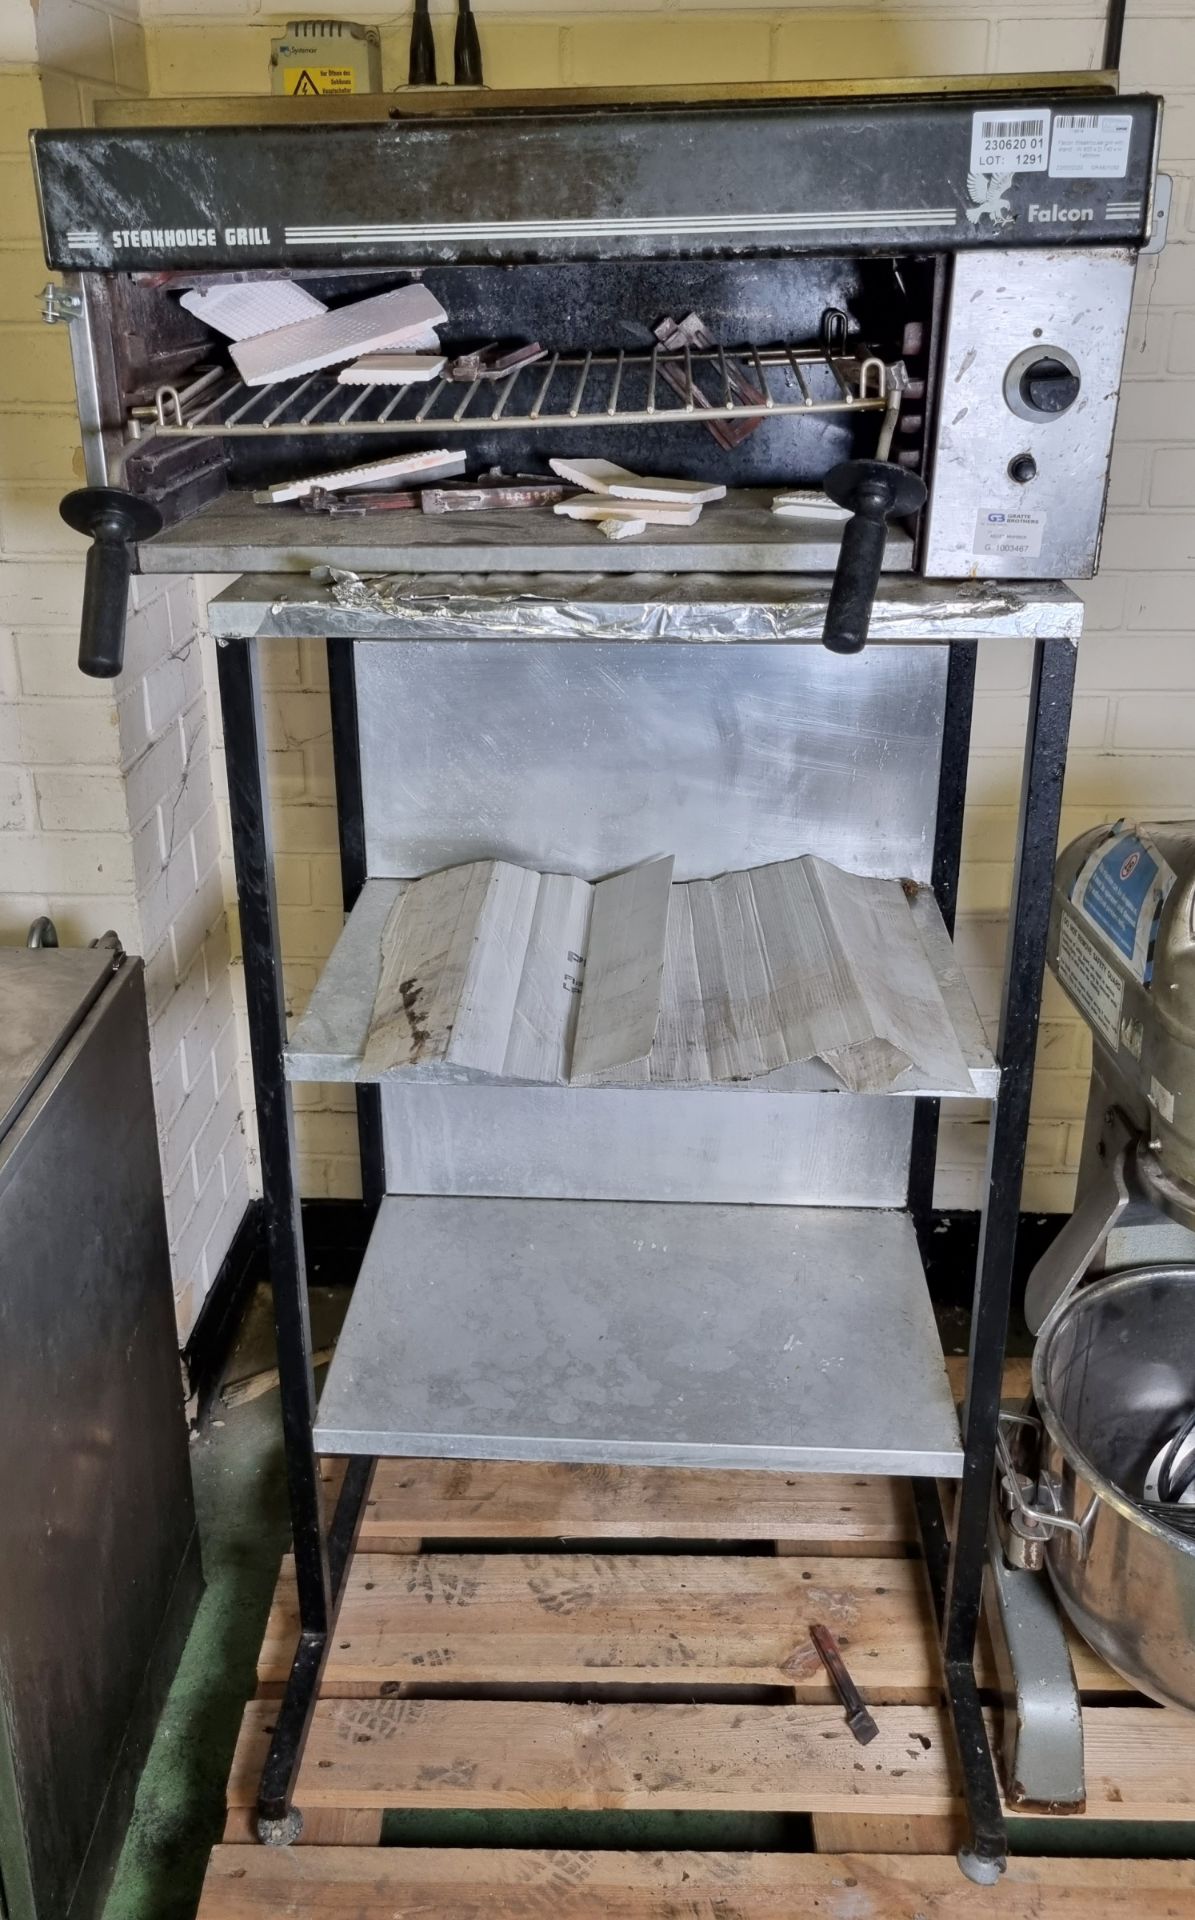 Falcon Steakhouse grill with stand - W 800 x D 740 x H 1450mm